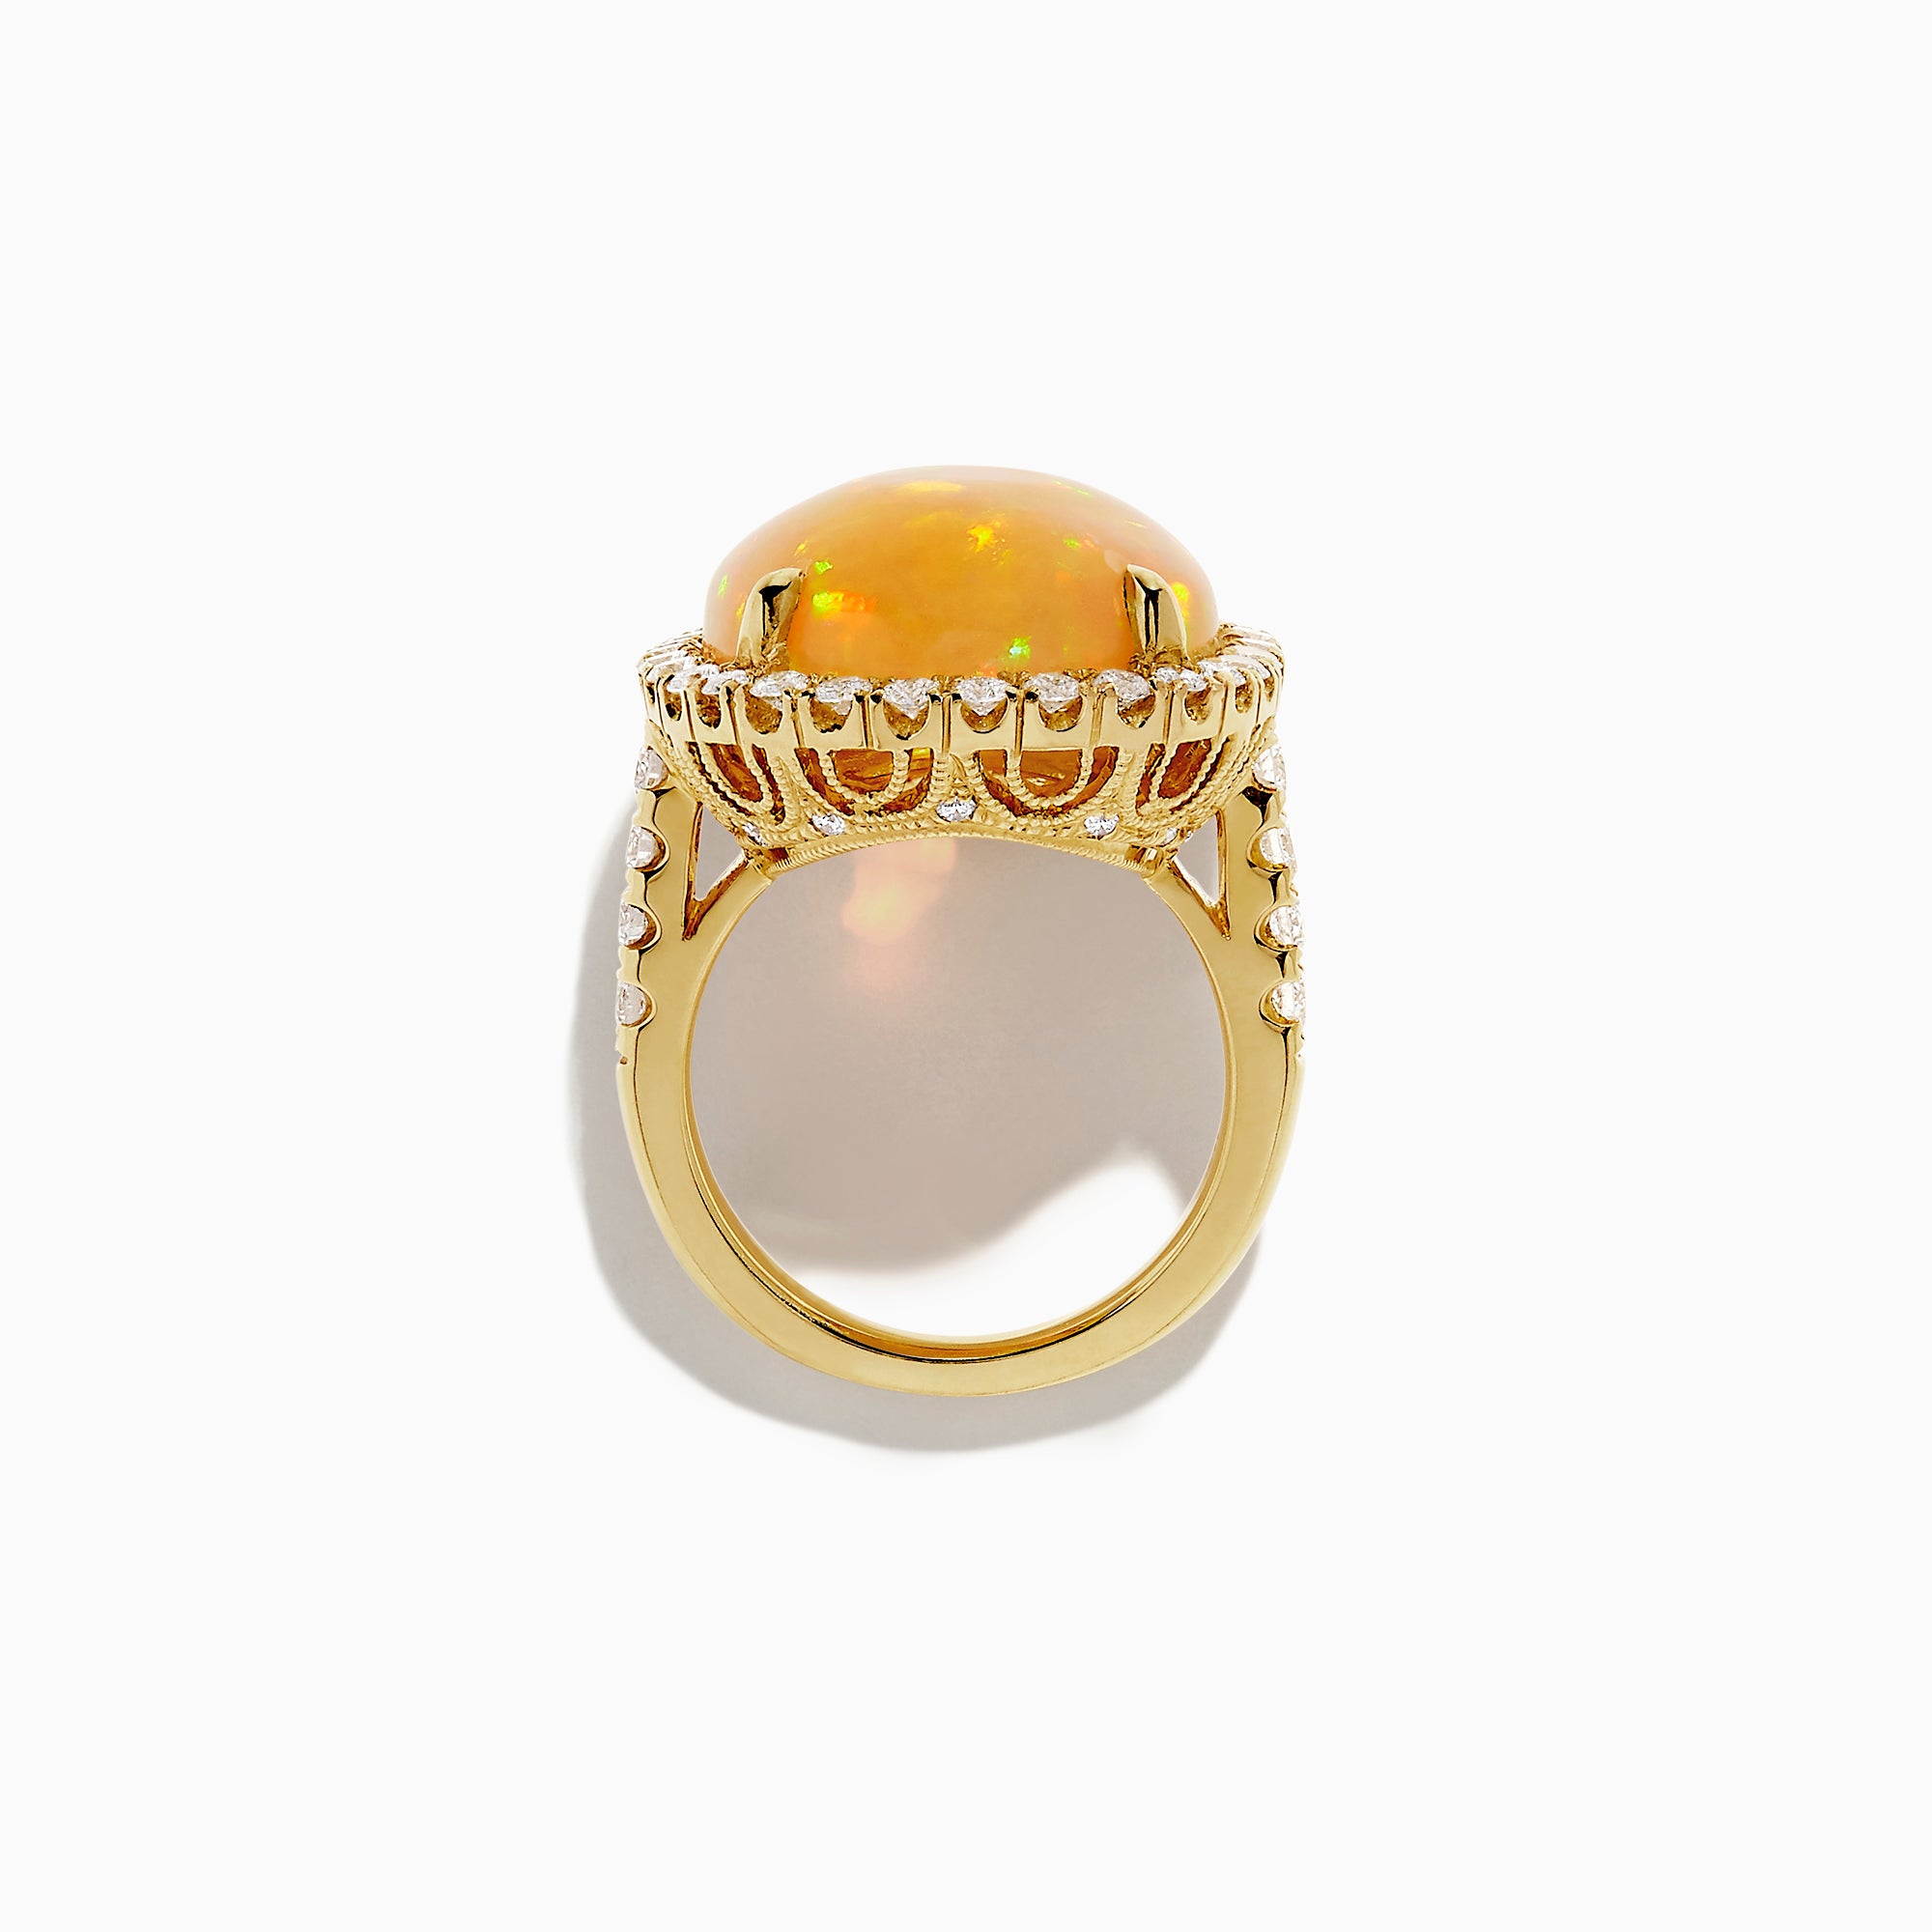 Effy 18K Yellow Gold Opal and Diamond Cocktail Ring, 15.85 TCW